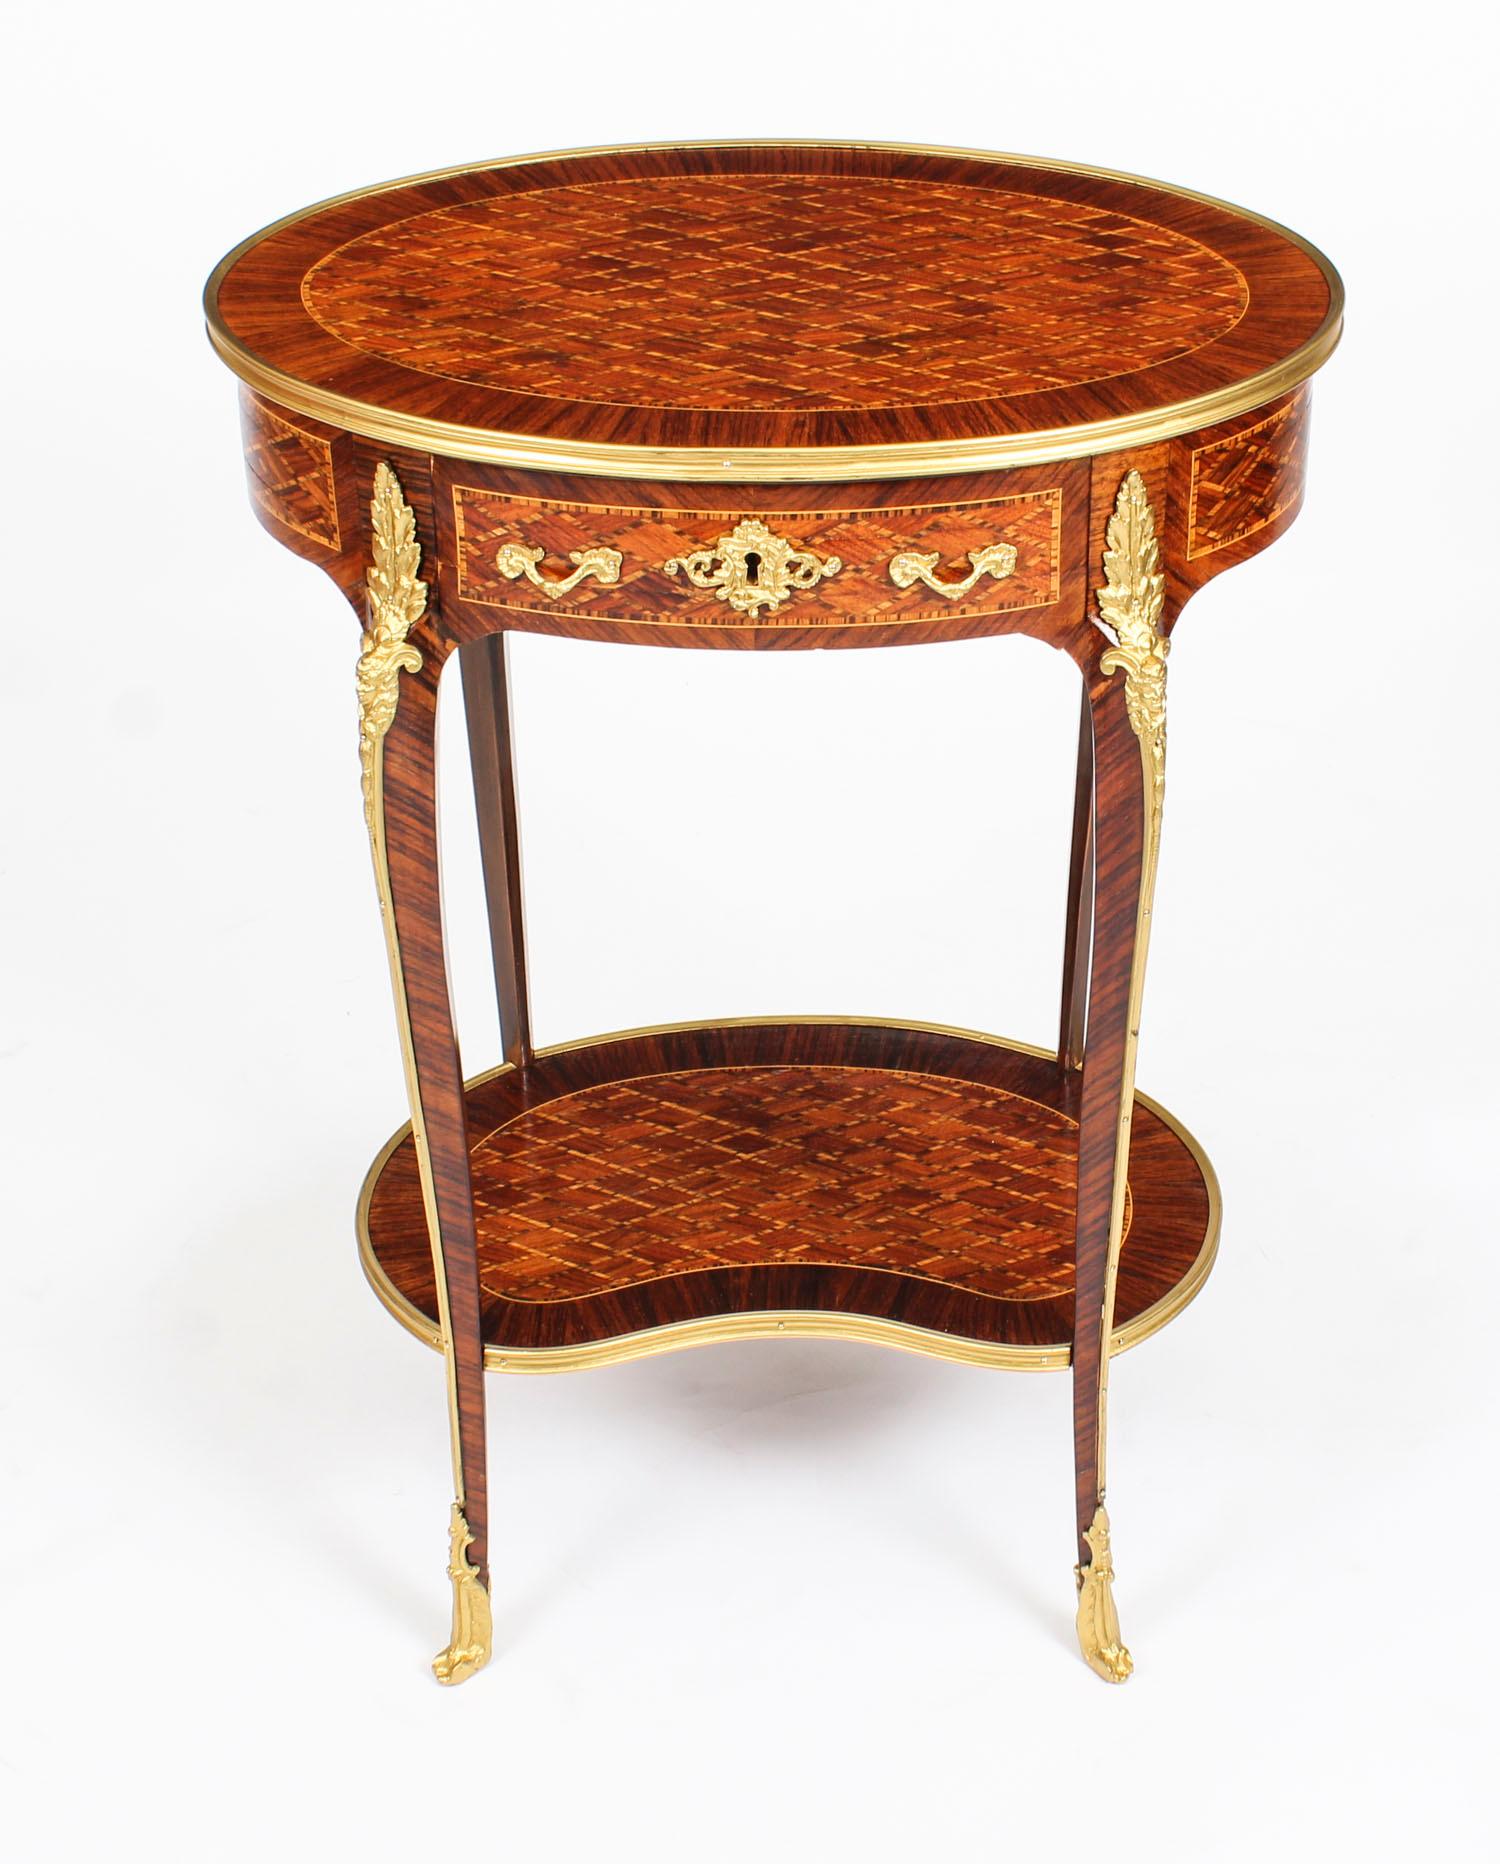 French Antique Pair of Ormolu Mounted Parquetry Occasional Tables, 19th Century